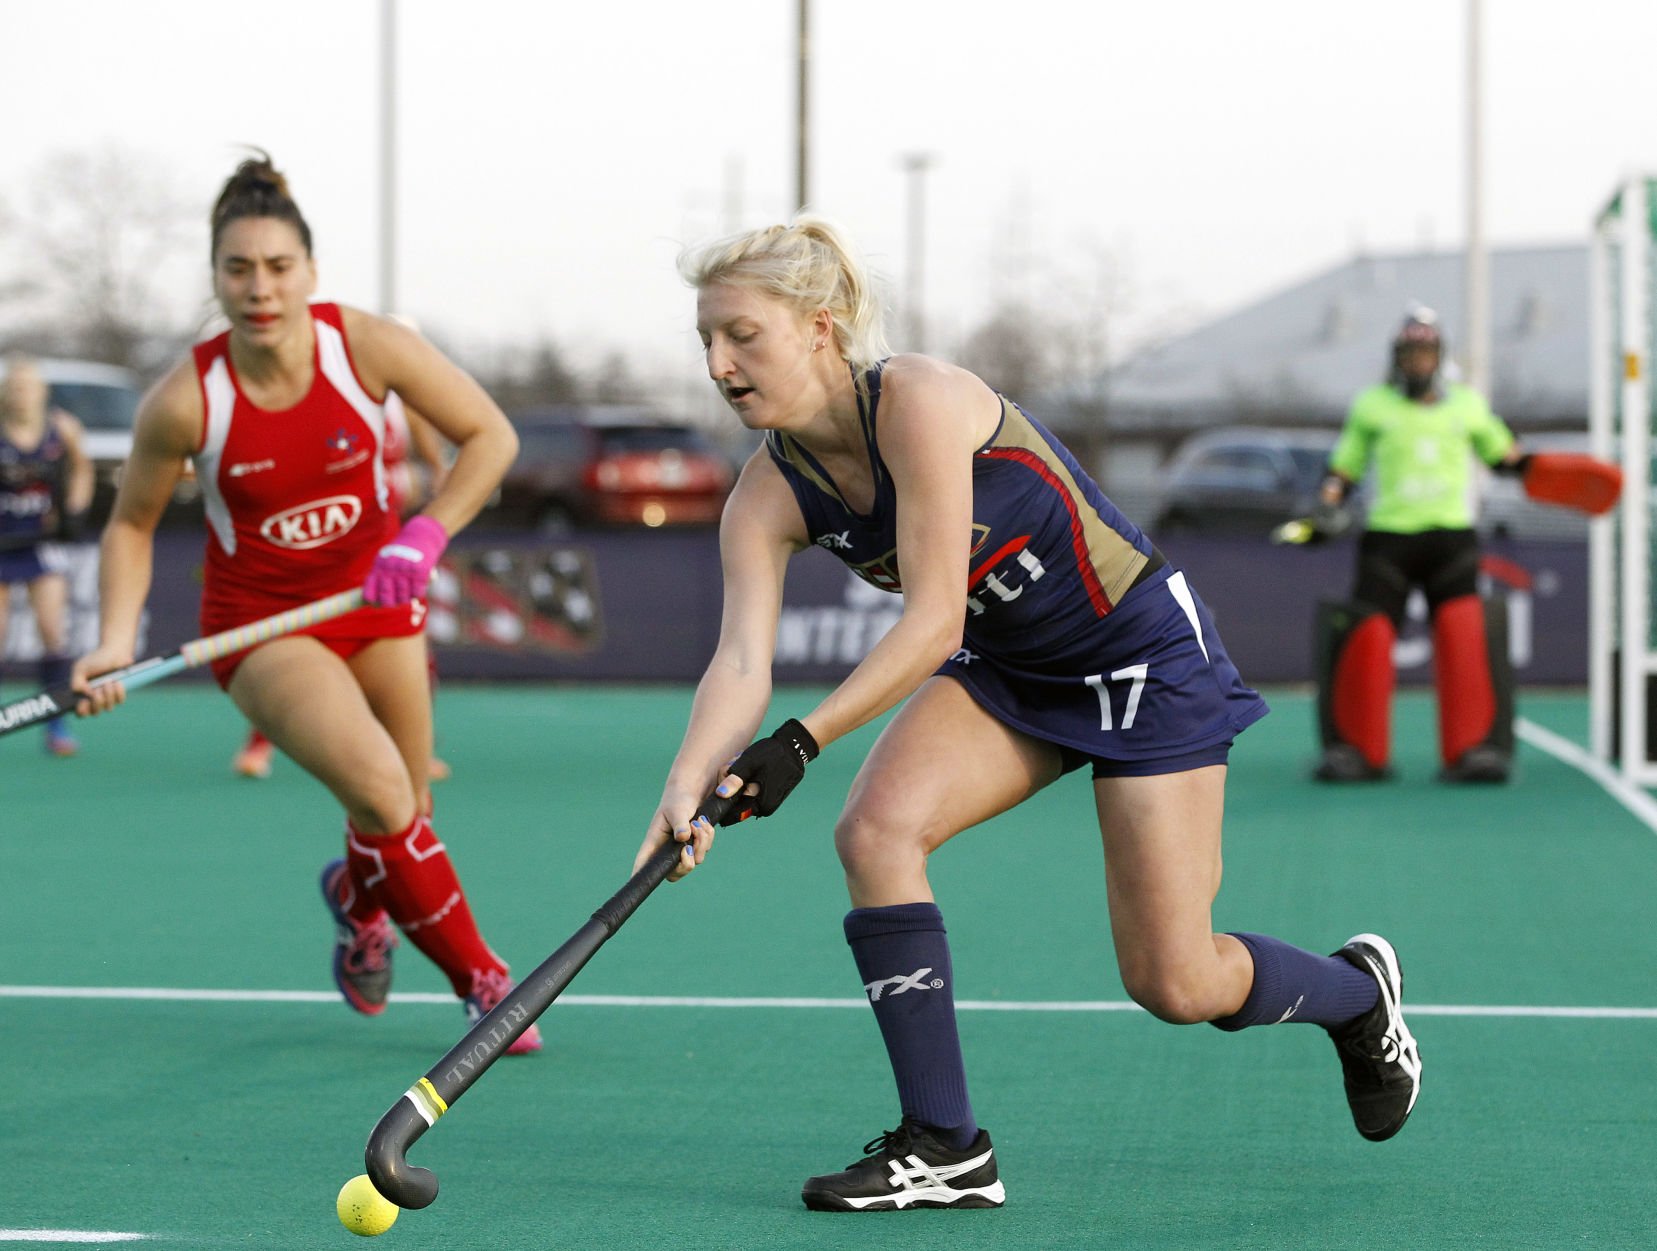 Watch FIH Pro League highlights from USA Field Hockey at the Netherlands video Field Hockey lancasteronline